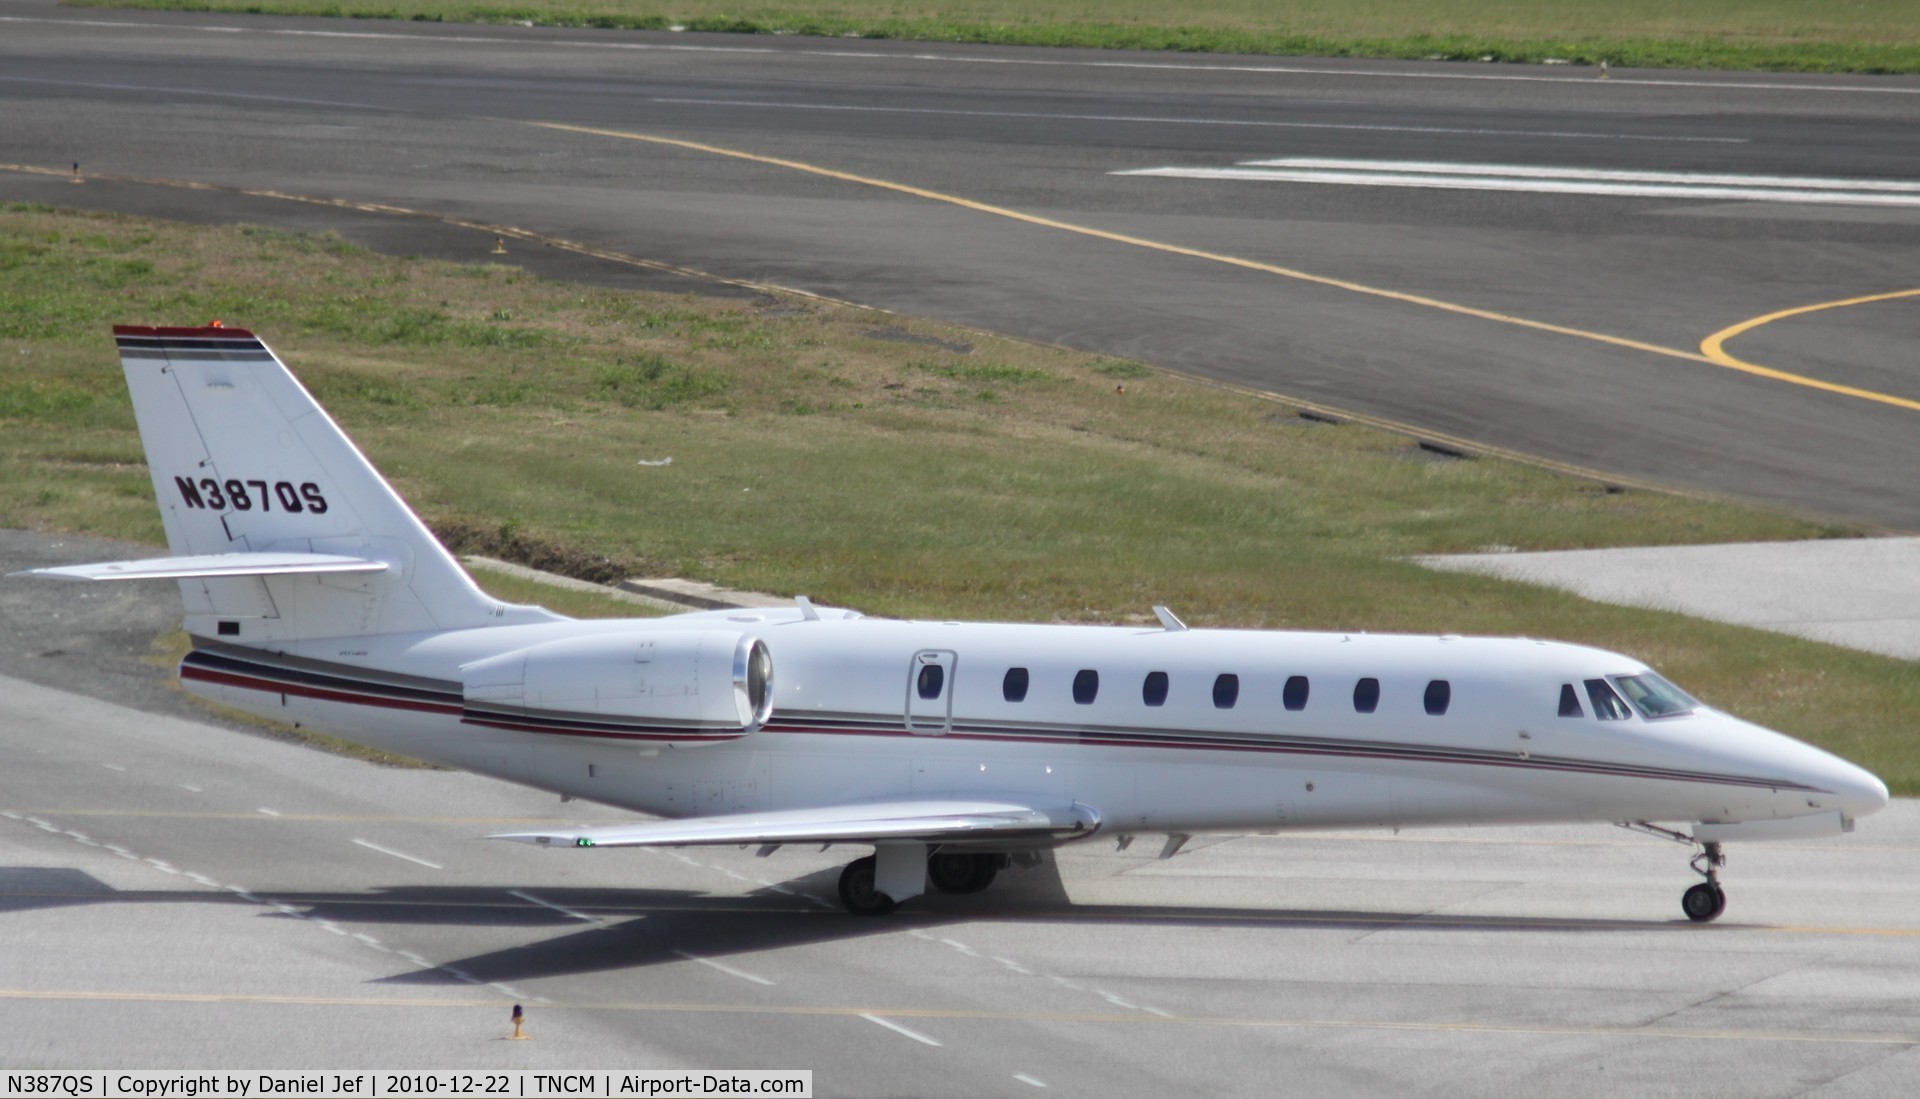 N387QS, 2007 Cessna 680 Citation Sovereign C/N 680-0119, N387QS taxing for take off at TNCM